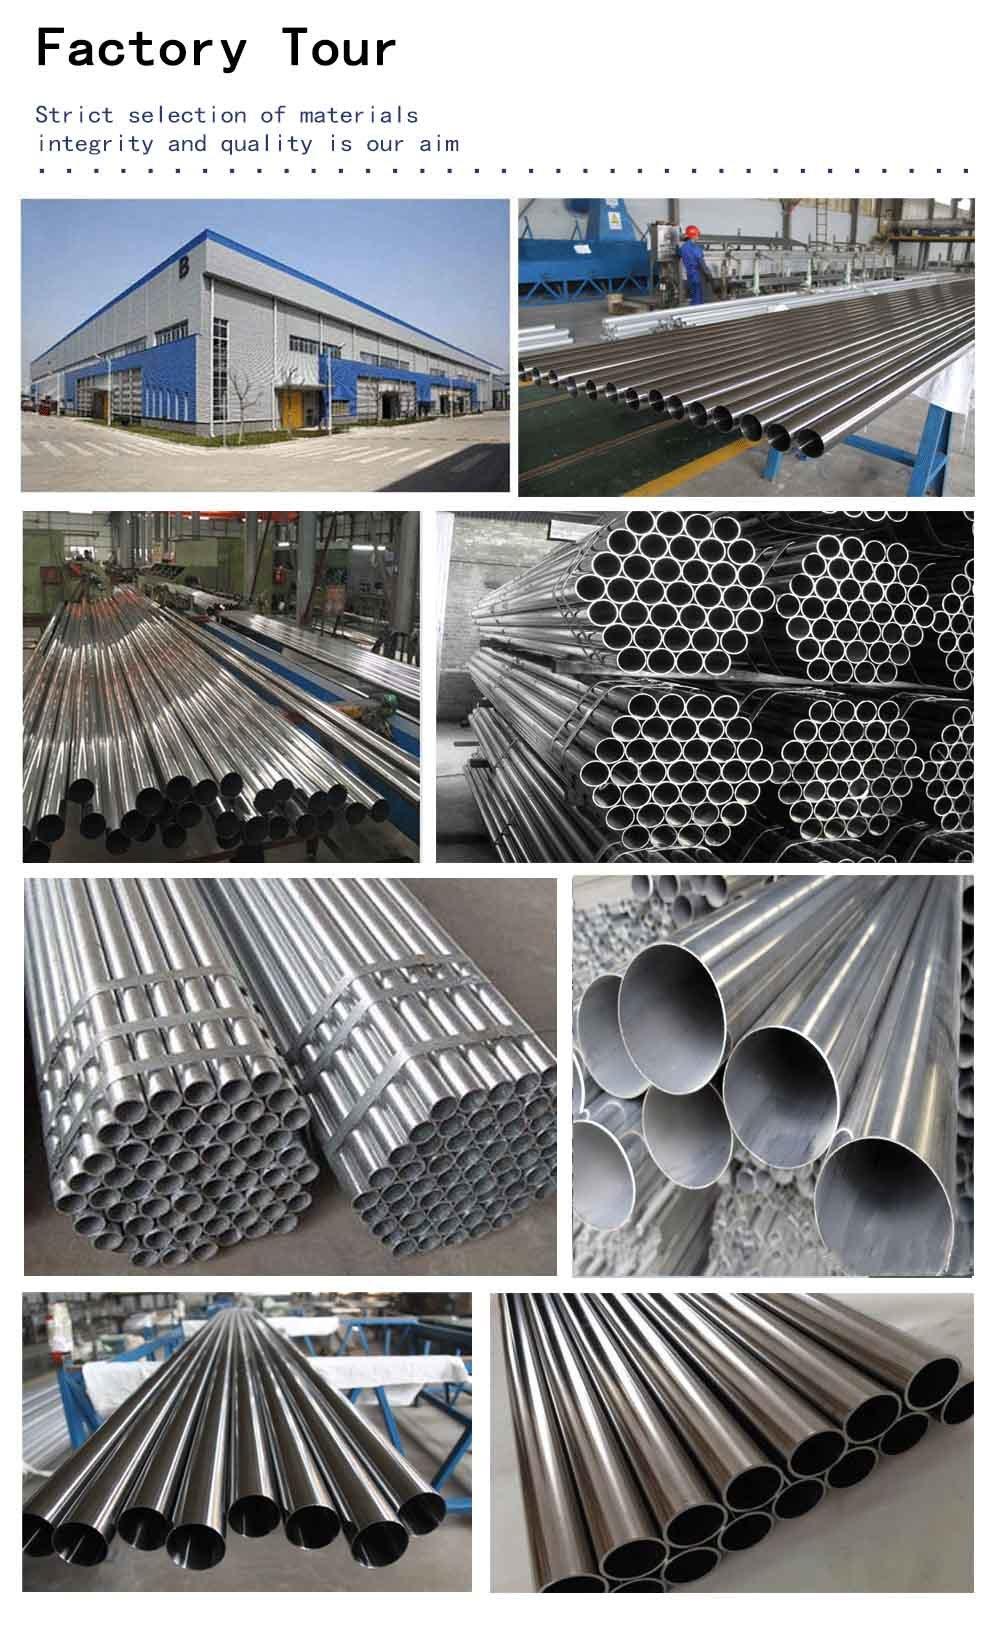 High Grade 16.5 mm/ 1.5 M AISI-304 Stainless Steel Thin-Walled Stainless Tube